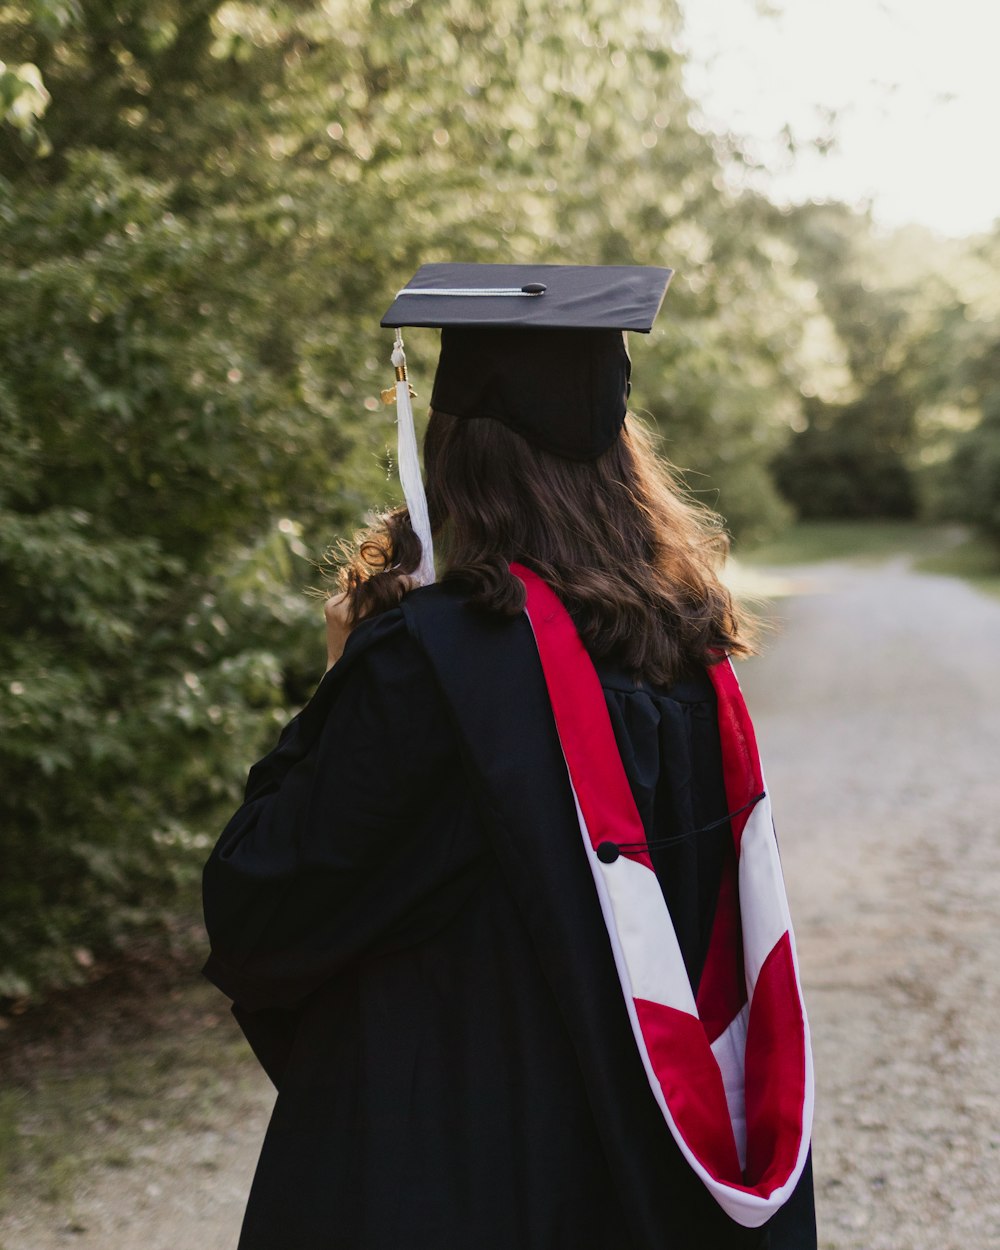 woman in academic dress and academic hat standing on dirt road during daytime